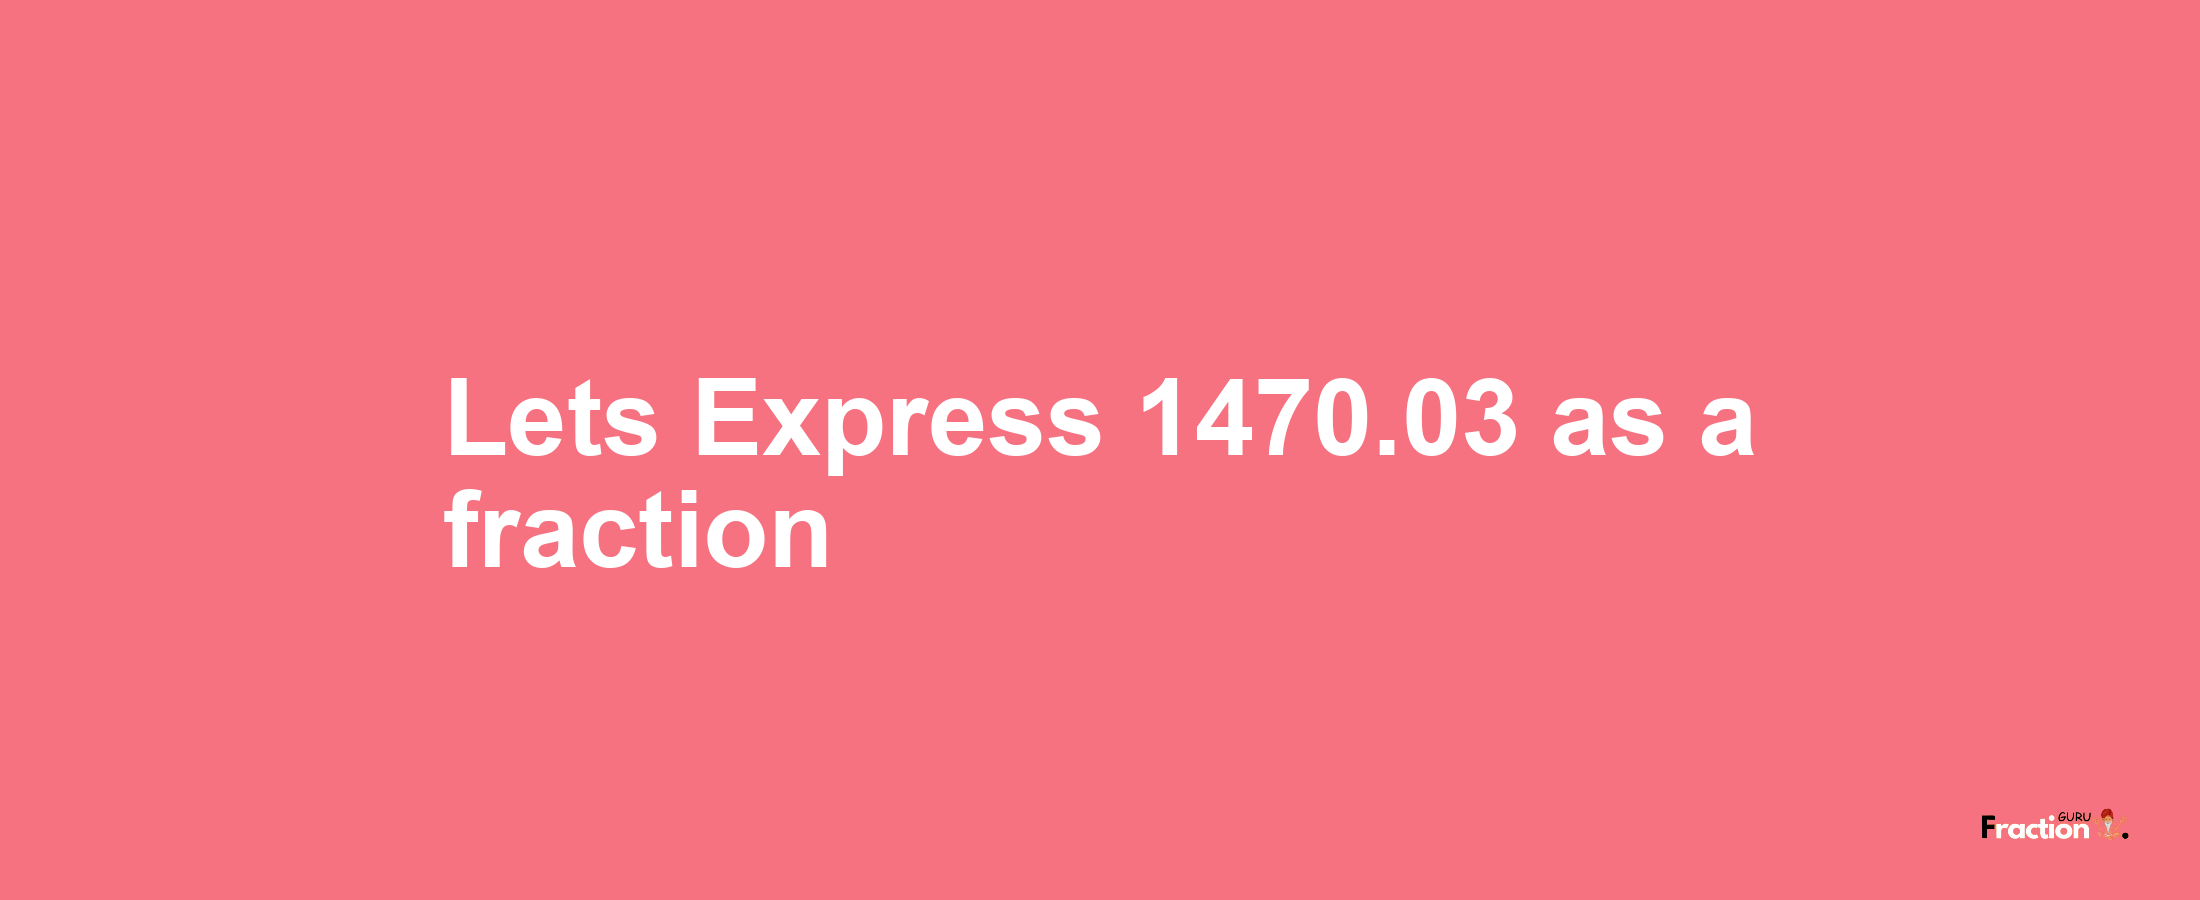 Lets Express 1470.03 as afraction